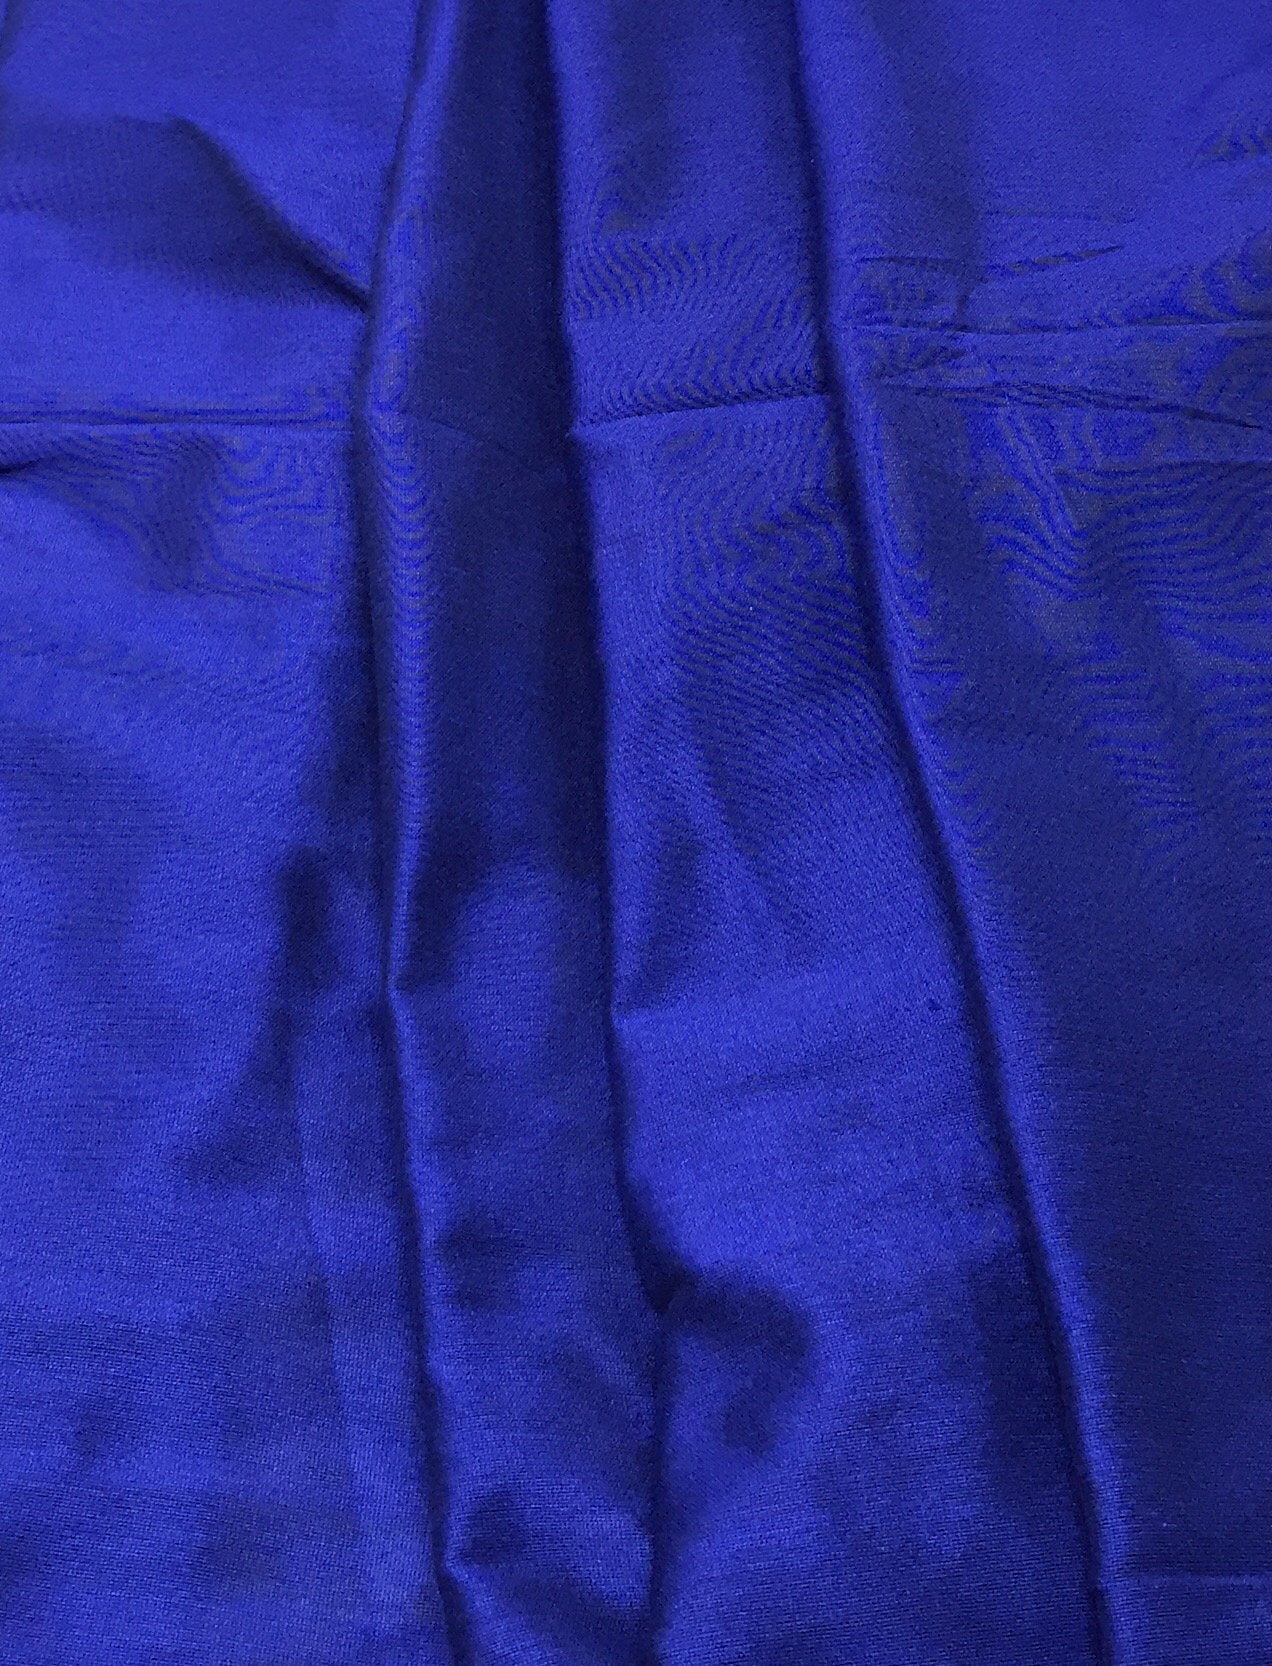 Cotton Silk Blue Solids  Fabric Material - By the yard